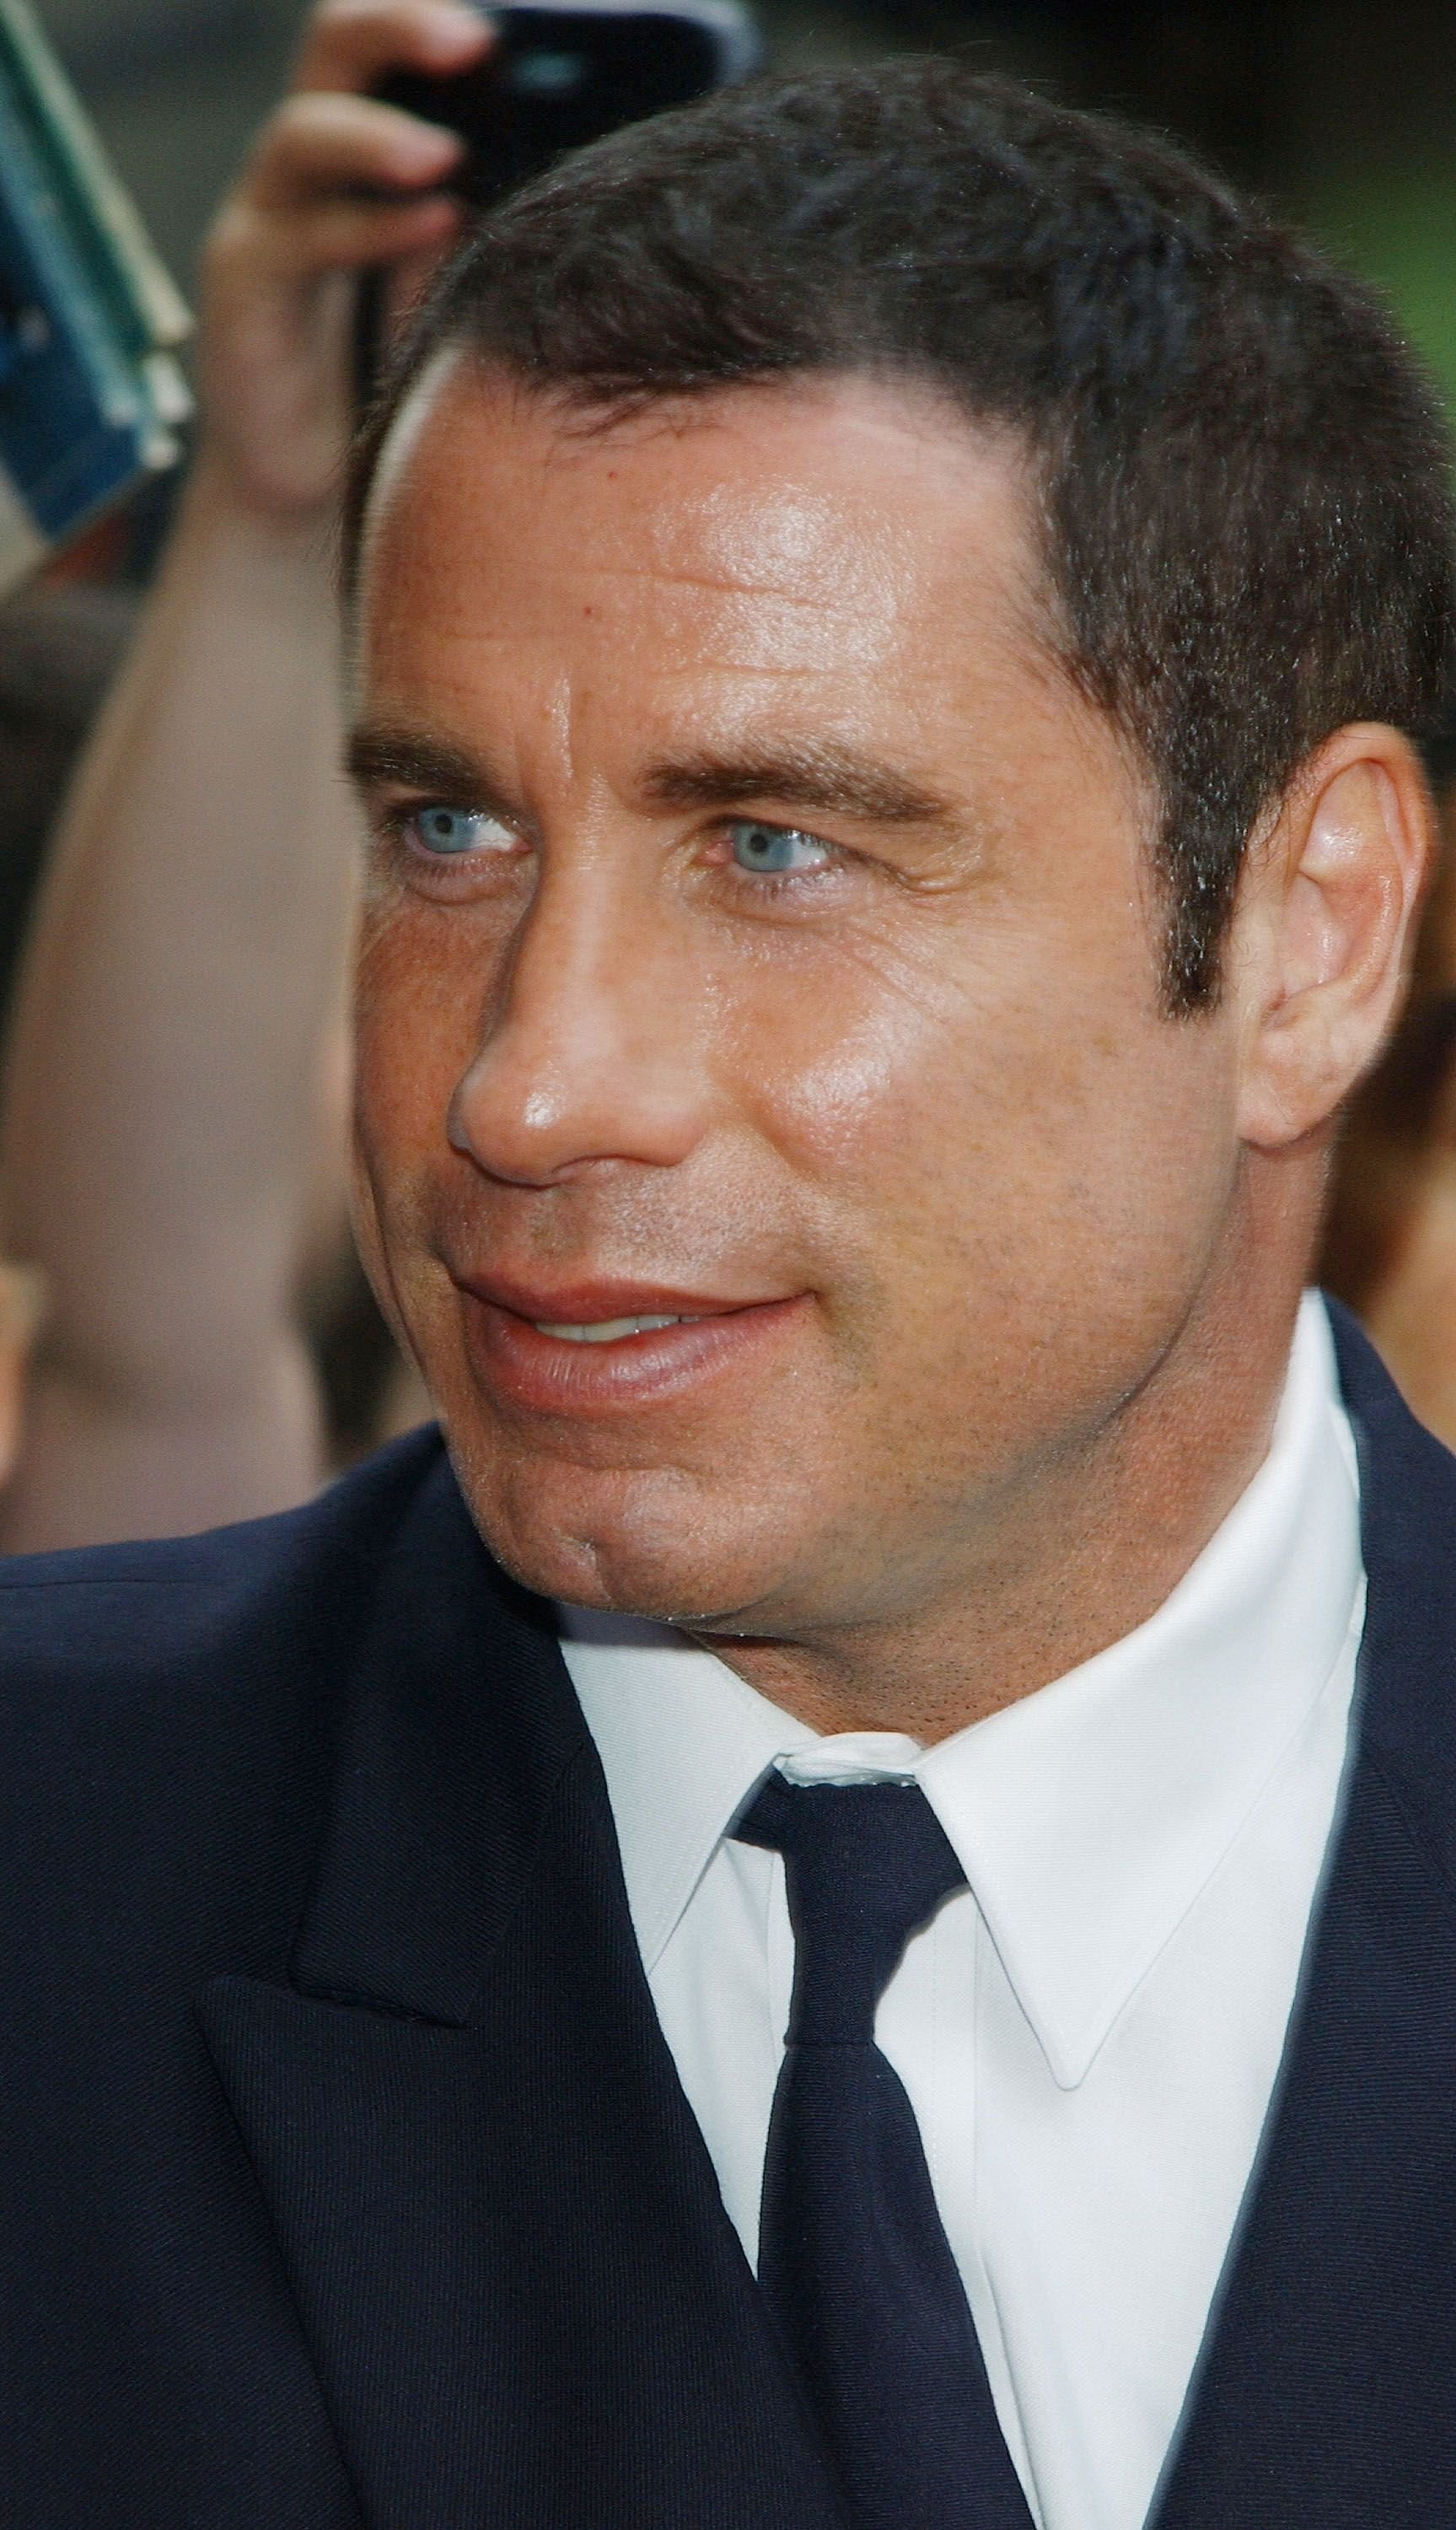 John Travolta arrives at the Ed Sullivan Theater for a taping of the David Letterman Show. | Source: Getty Images